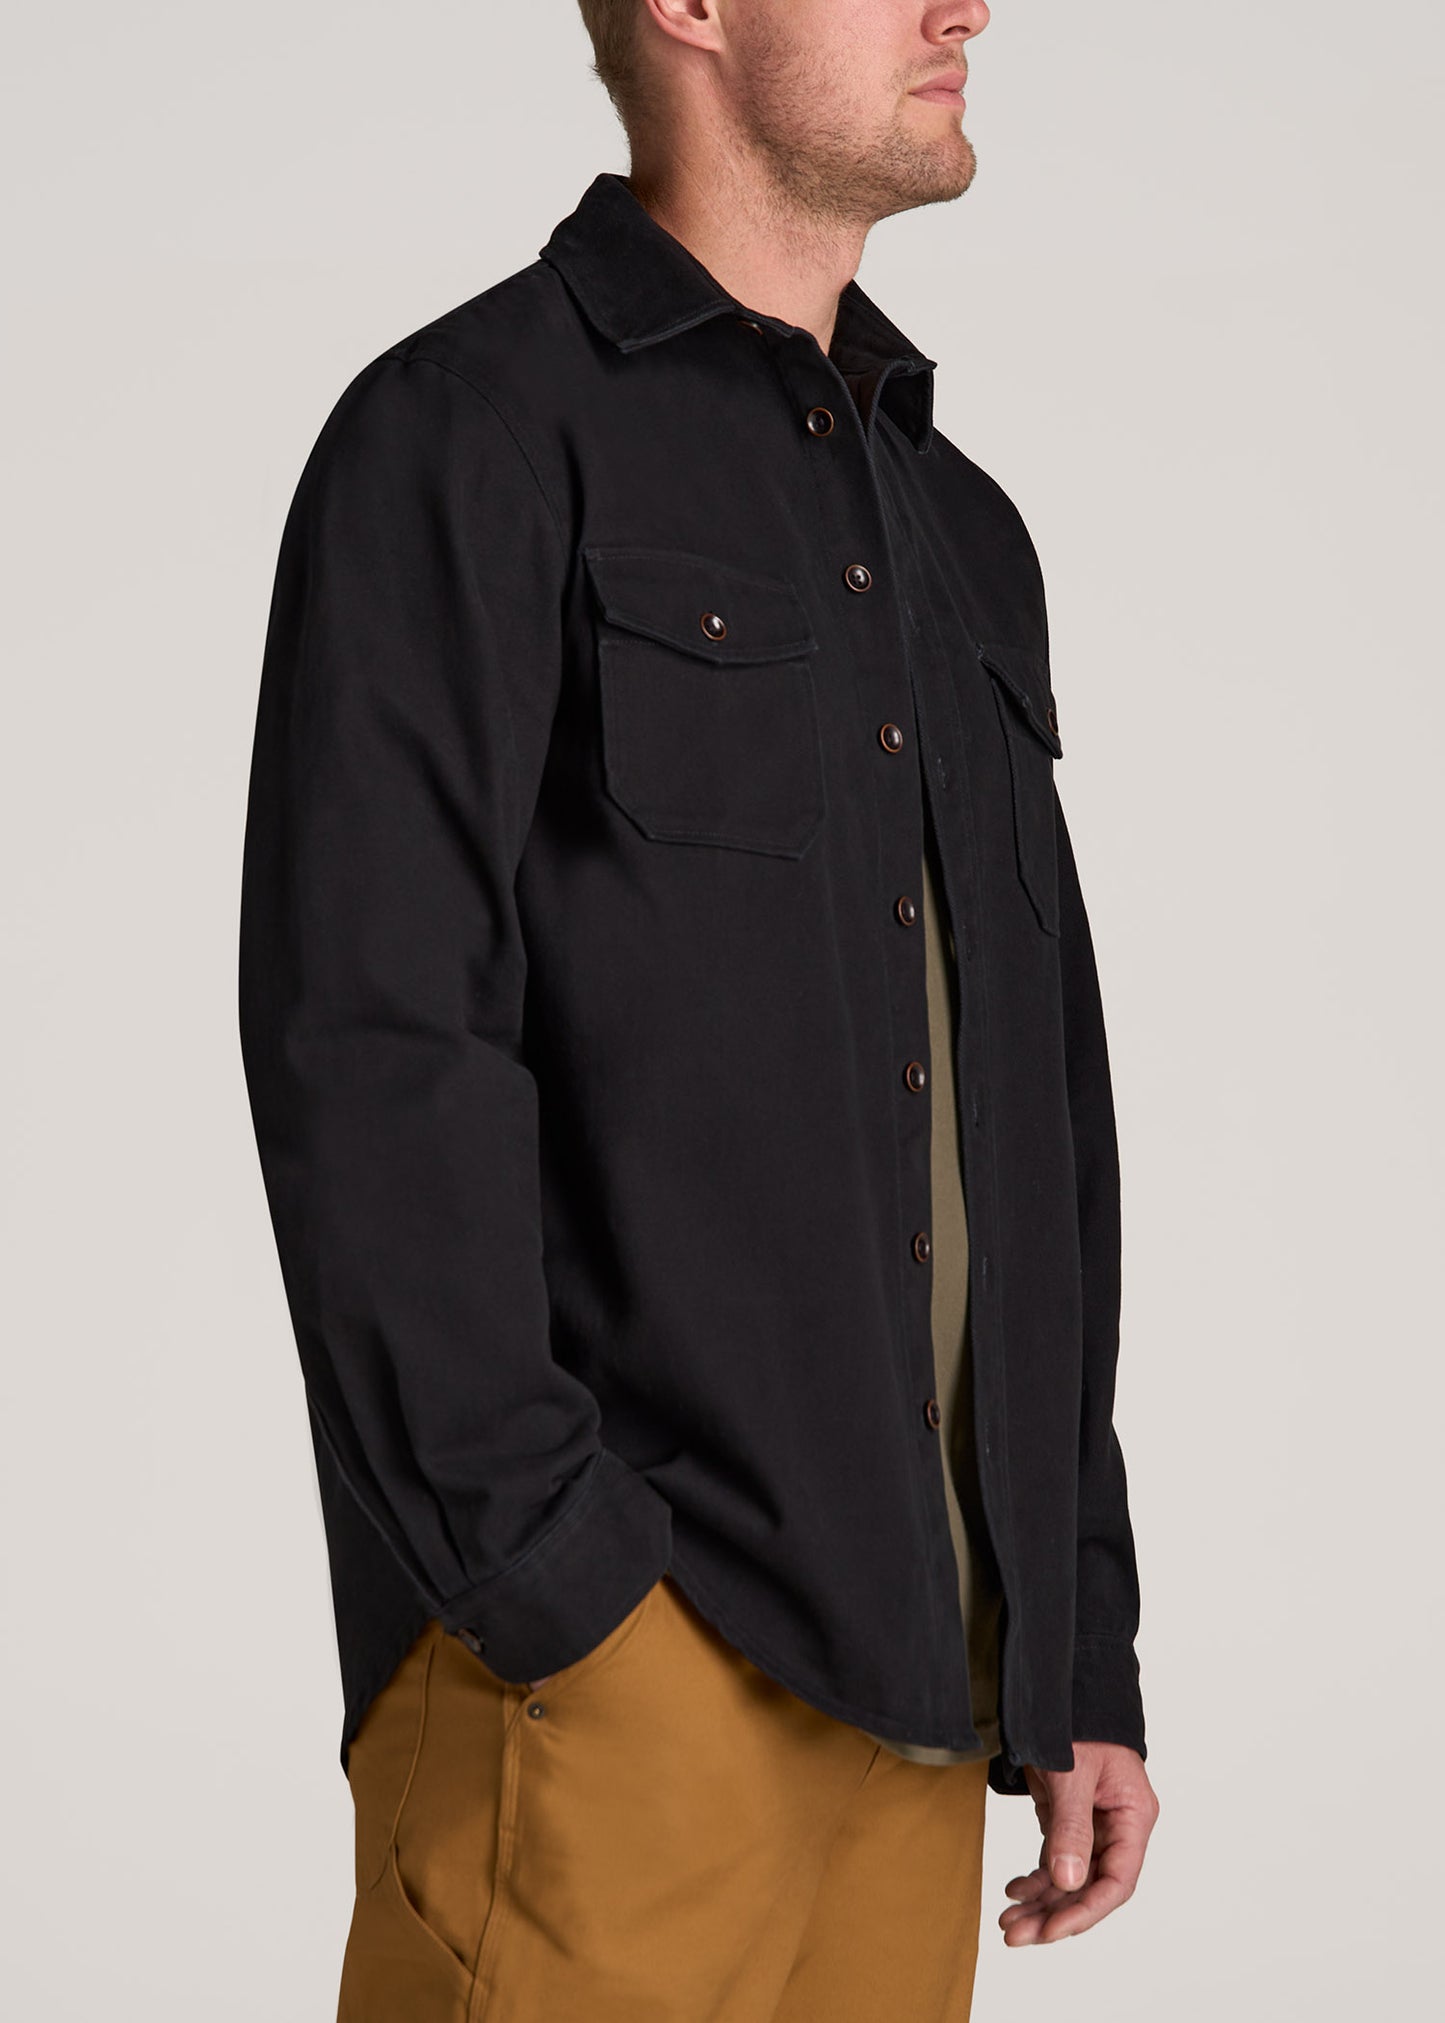 LJ&S Heavyweight Cotton Twill Overshirt for Tall Men in Vintage Black